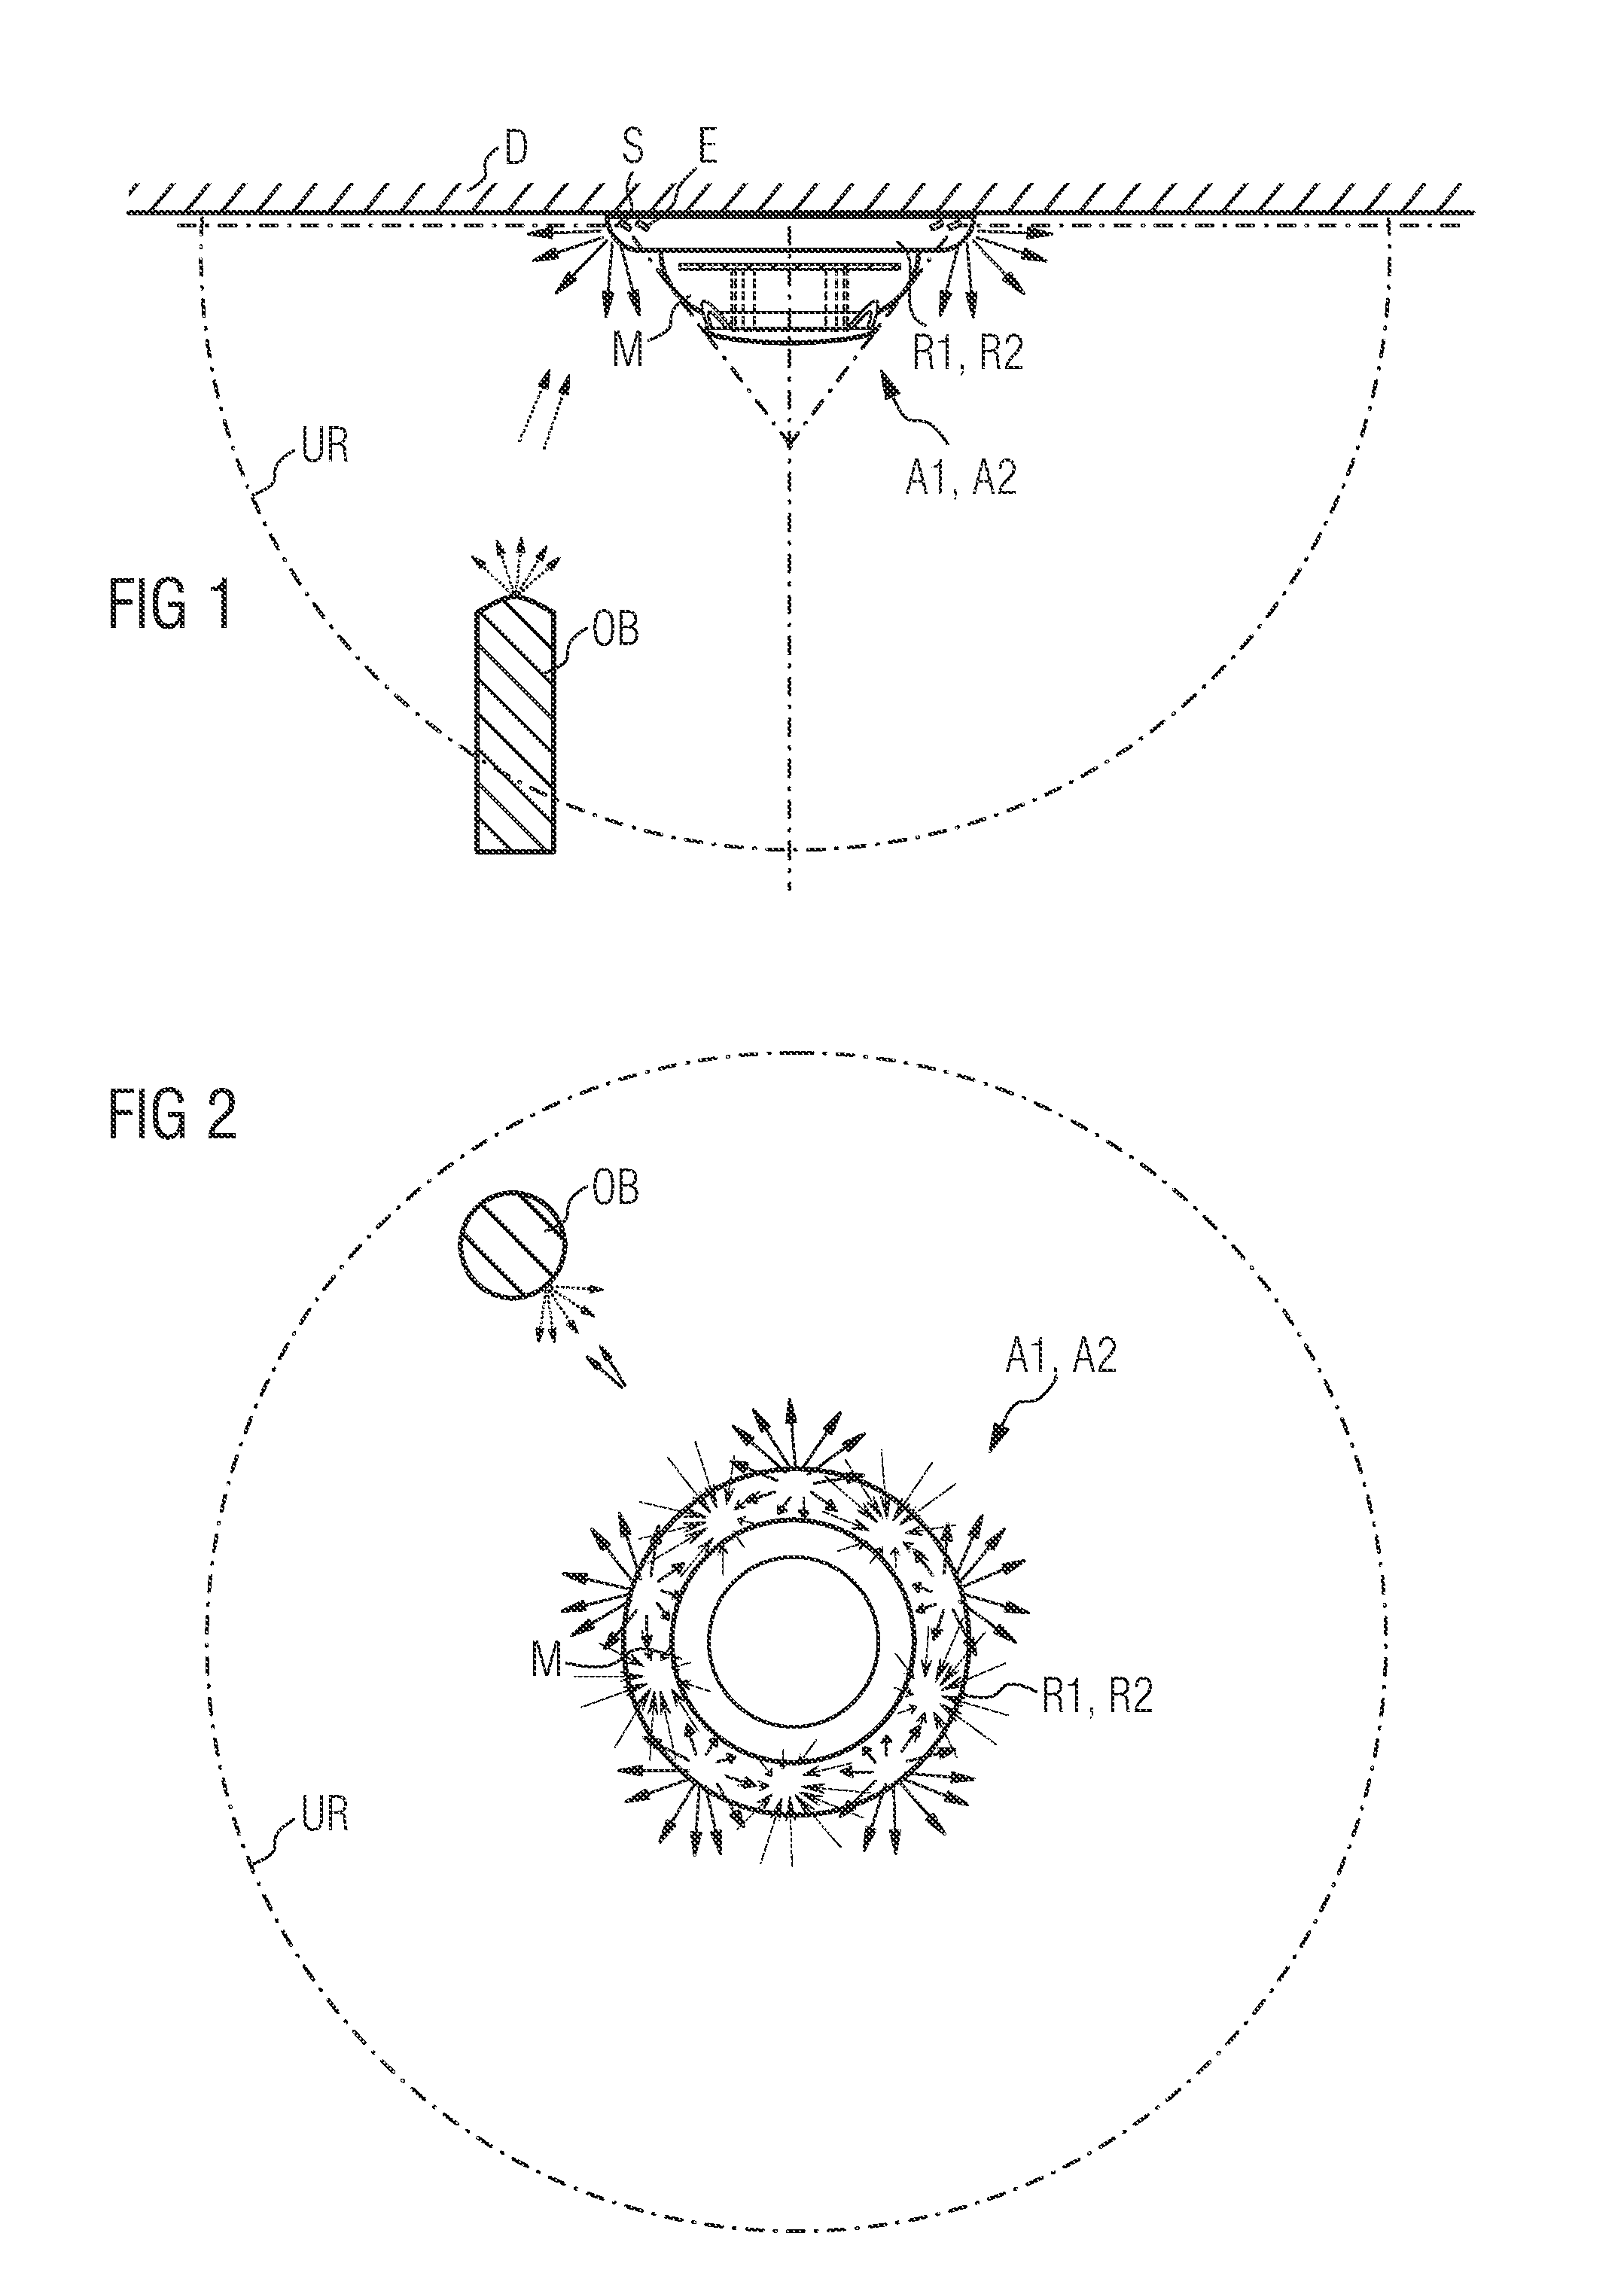 Auxiliary device for a hazard alarm constructed as a point type detector for function monitoring of the hazard alarm, and an arrangement and method of monitoring using a device of this kind